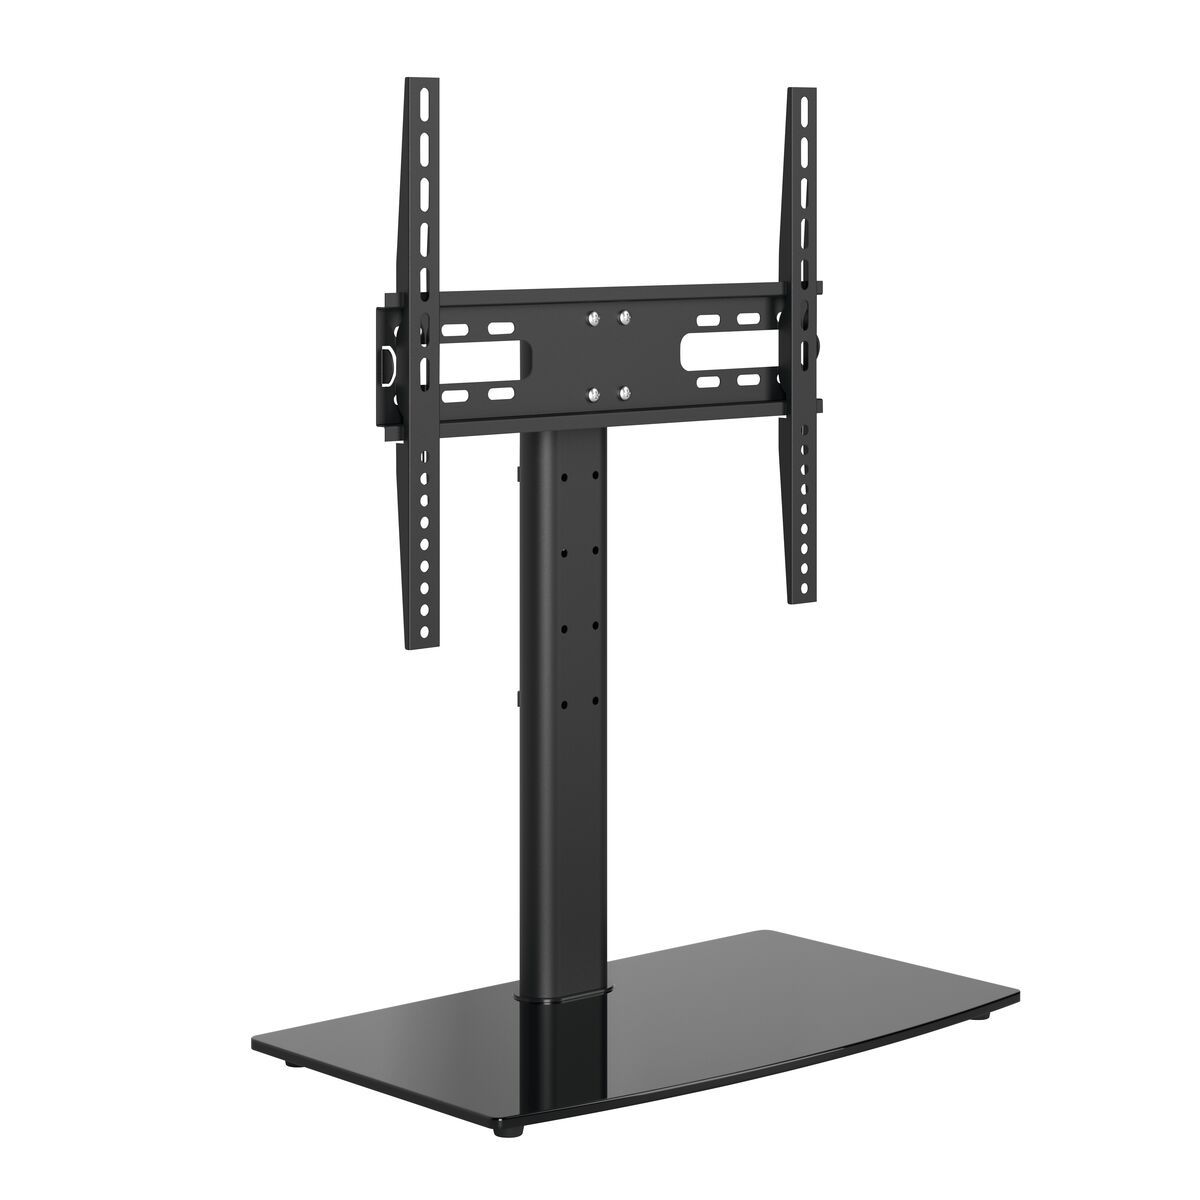 Vogel's MS 3085 Tabletop TV stand - Suitable for 32 up to 65 inch TVs - Up to 50° - Product